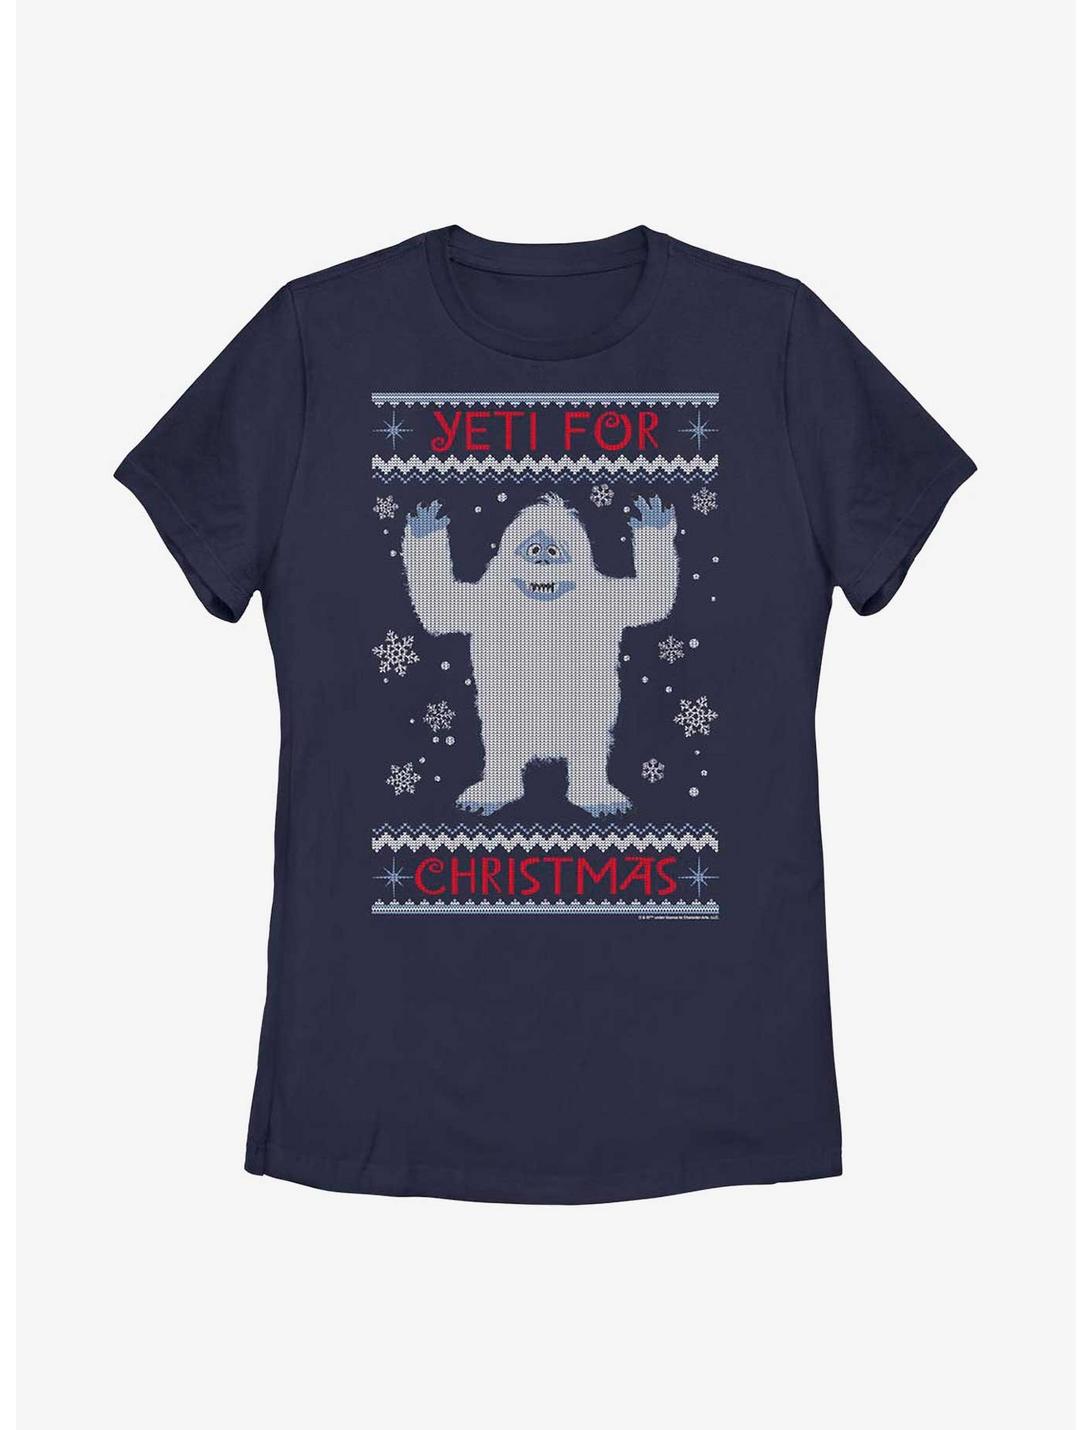 Rudolph The Red-Nosed Reindeer Yeti For Christmas Ugly Sweater Womens T-Shirt, NAVY, hi-res